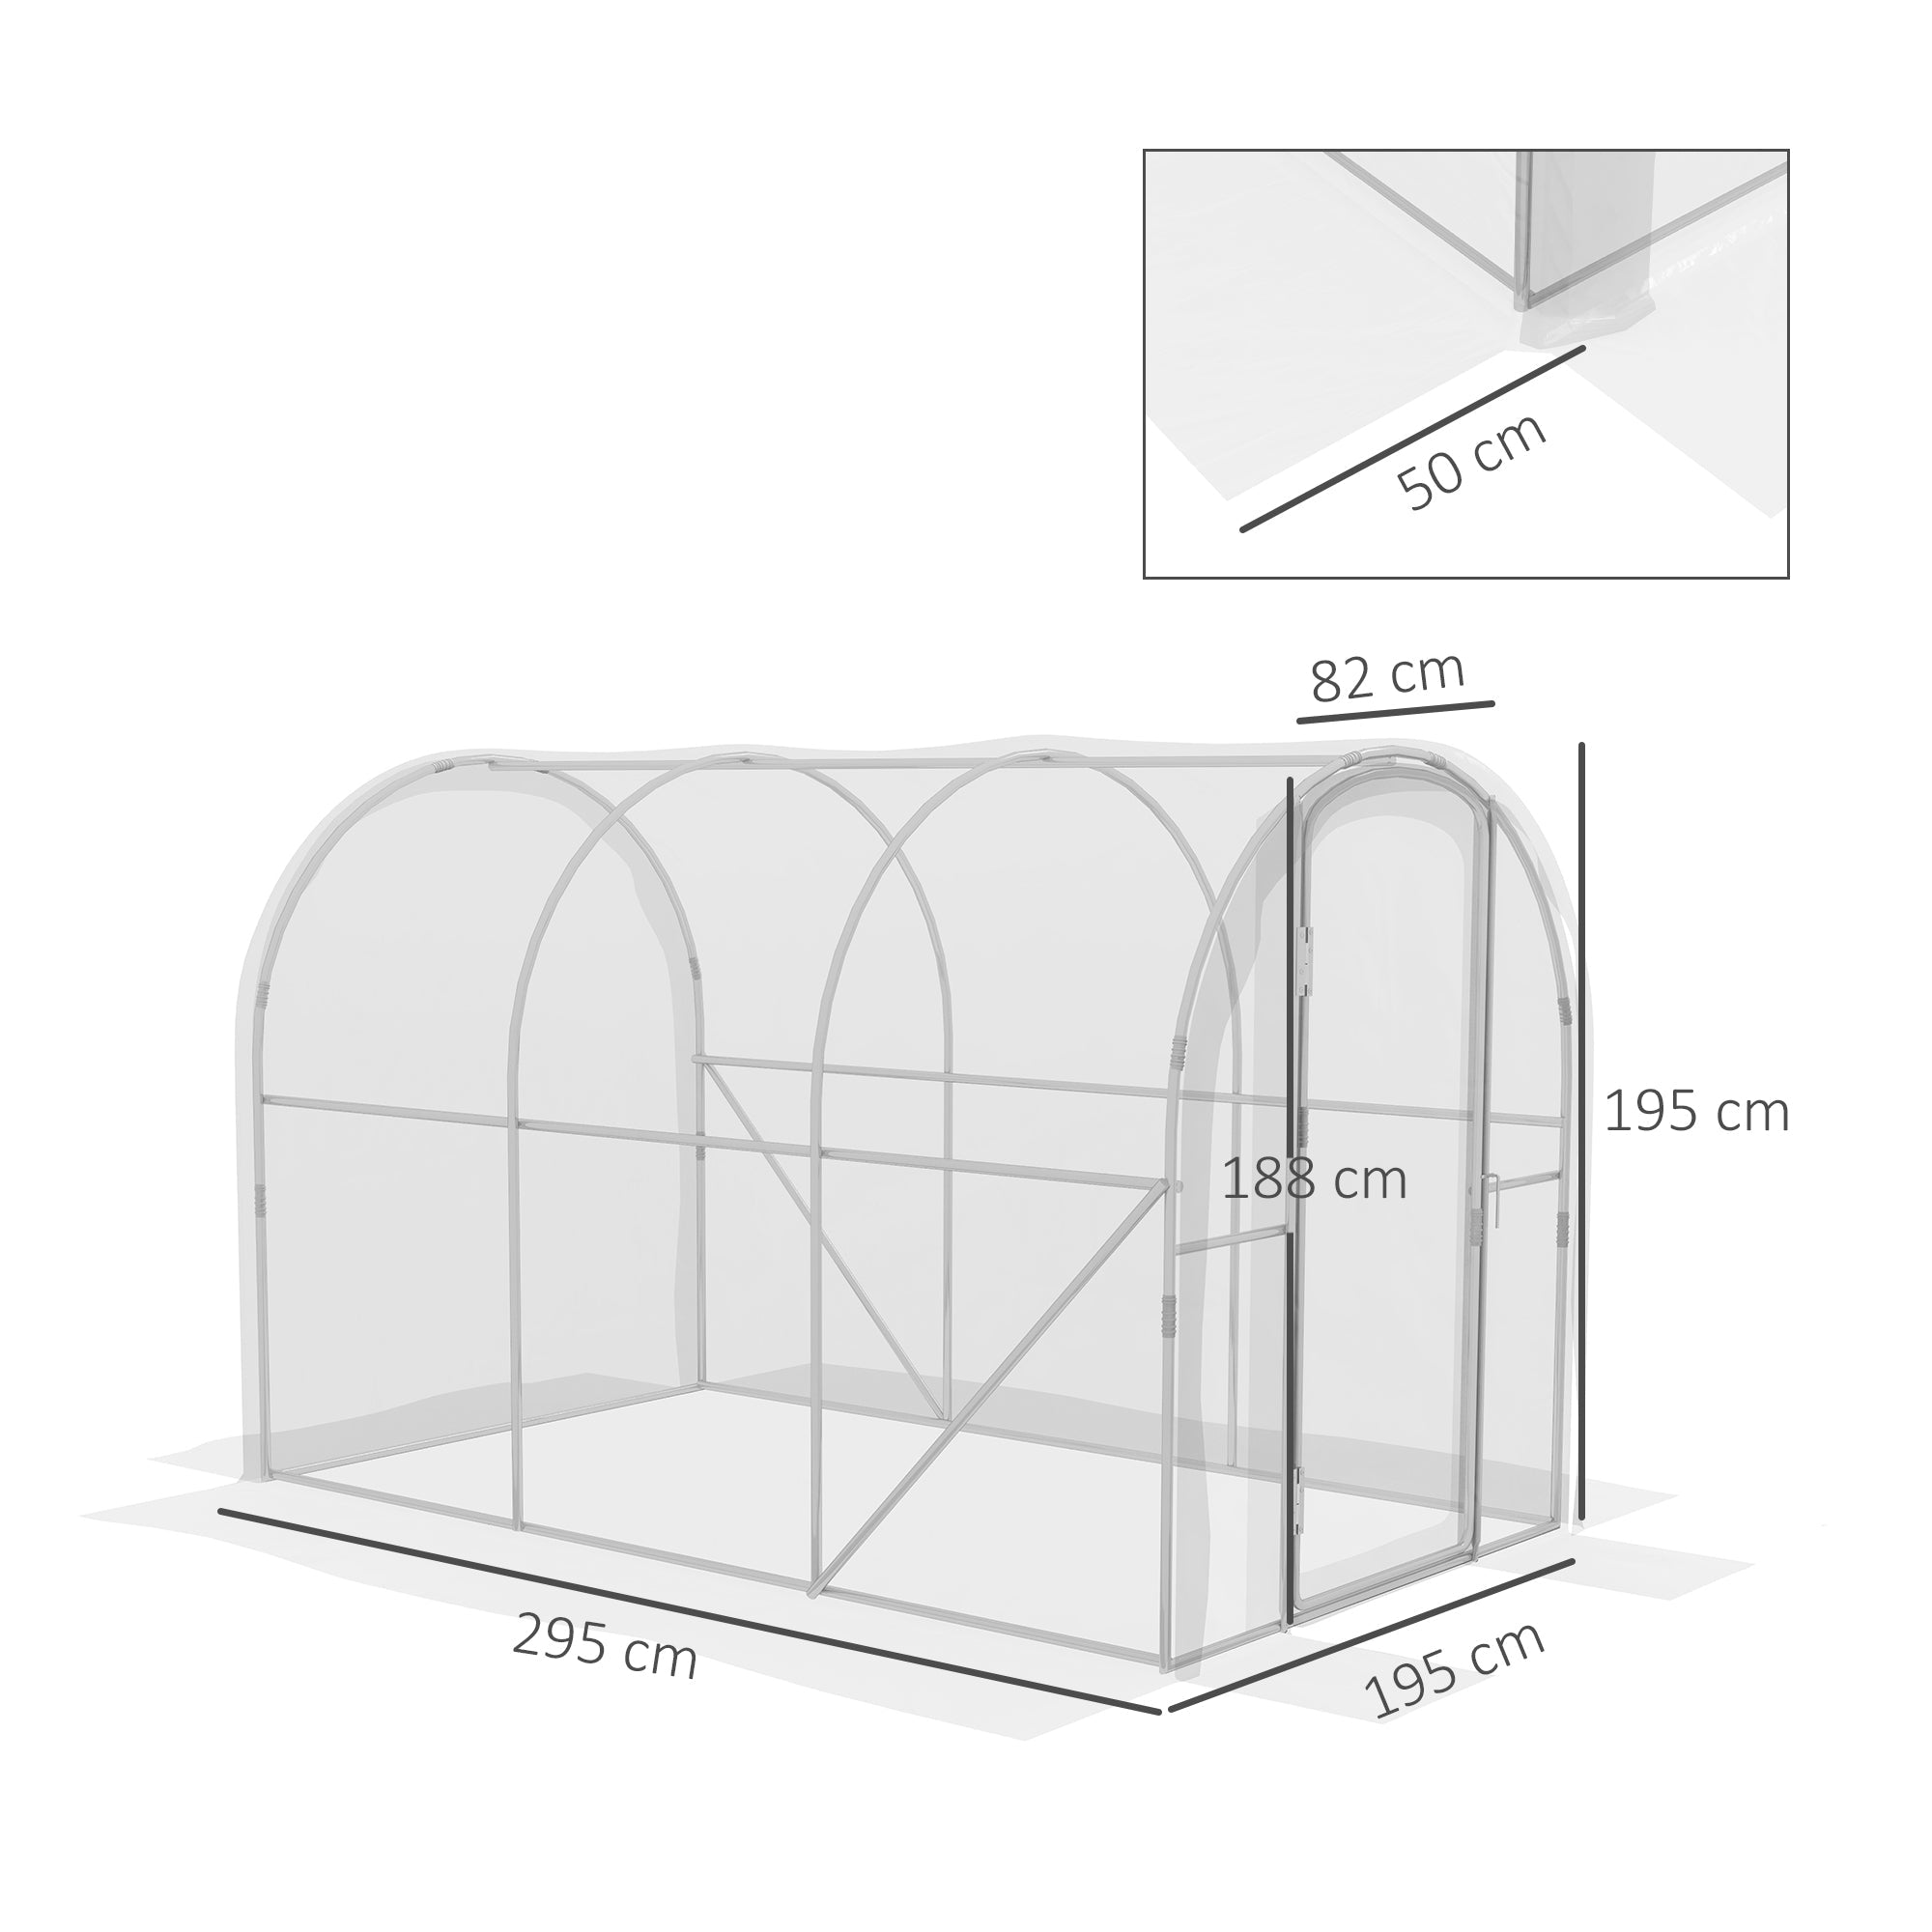 Polytunnel Greenhouse Walk-in Grow House with PE Cover, Door and Galvanised Steel Frame, 3 x 2 x 2m, Clear-2